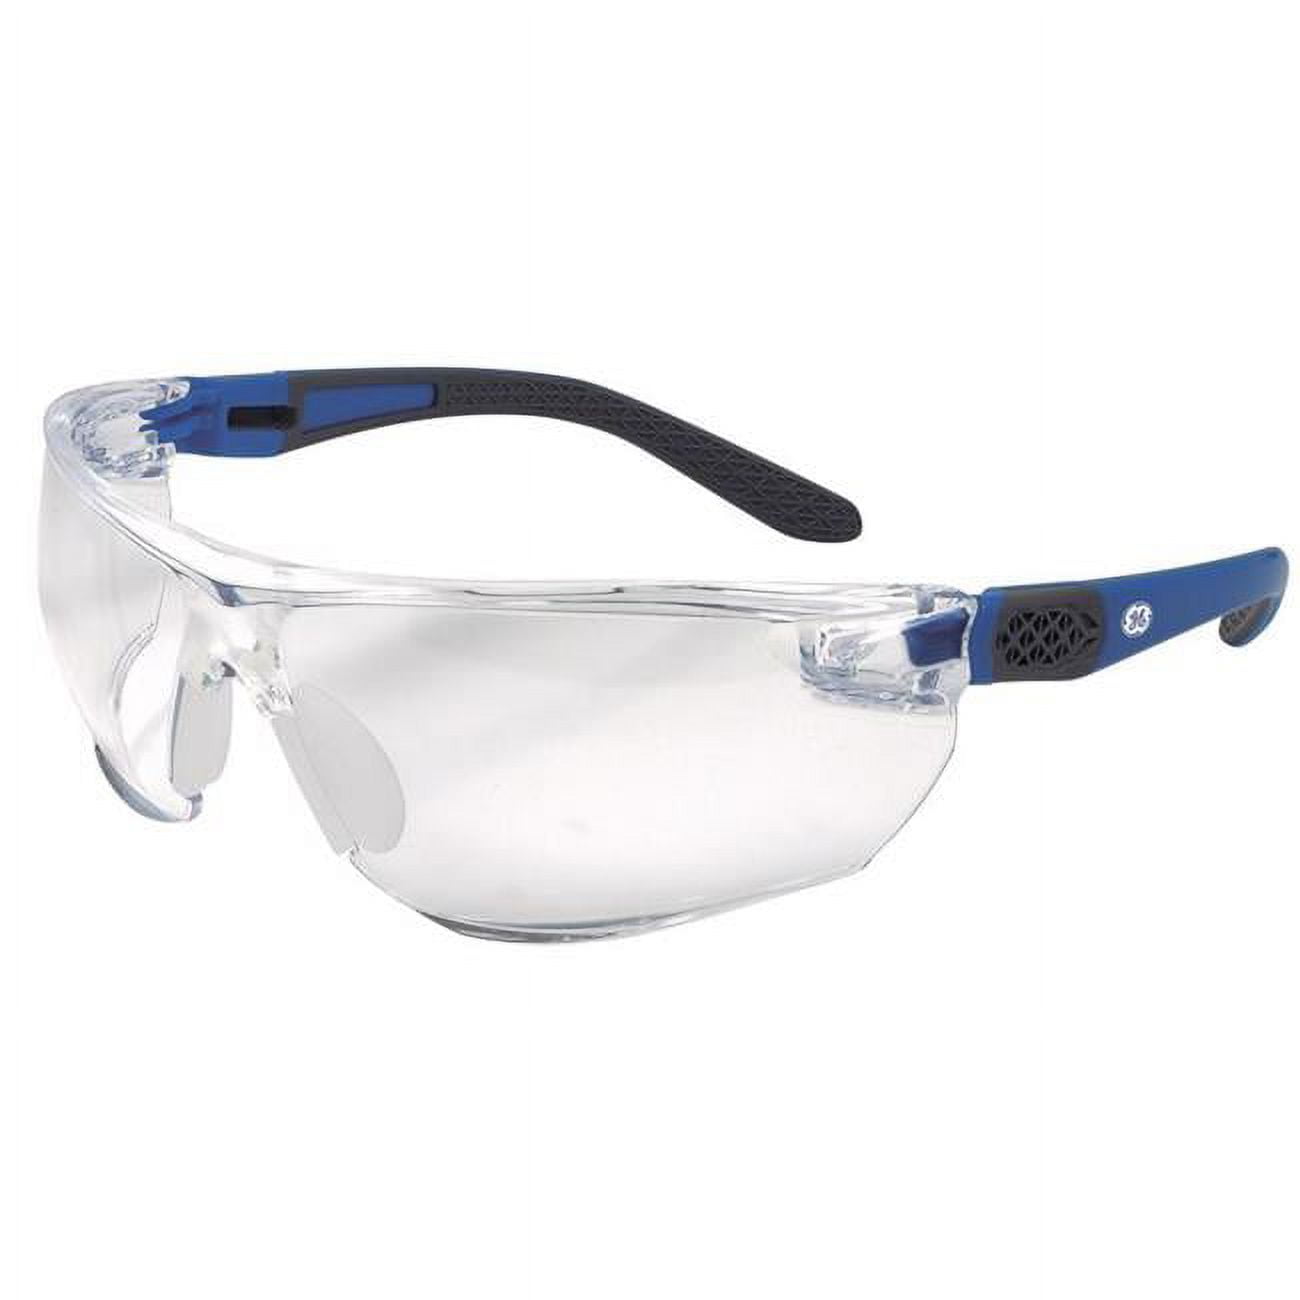 Picture of General Electric 2022415 02 Series Impact-Resistant Safety Glasses - Clear Lens Blue & Gray Frame